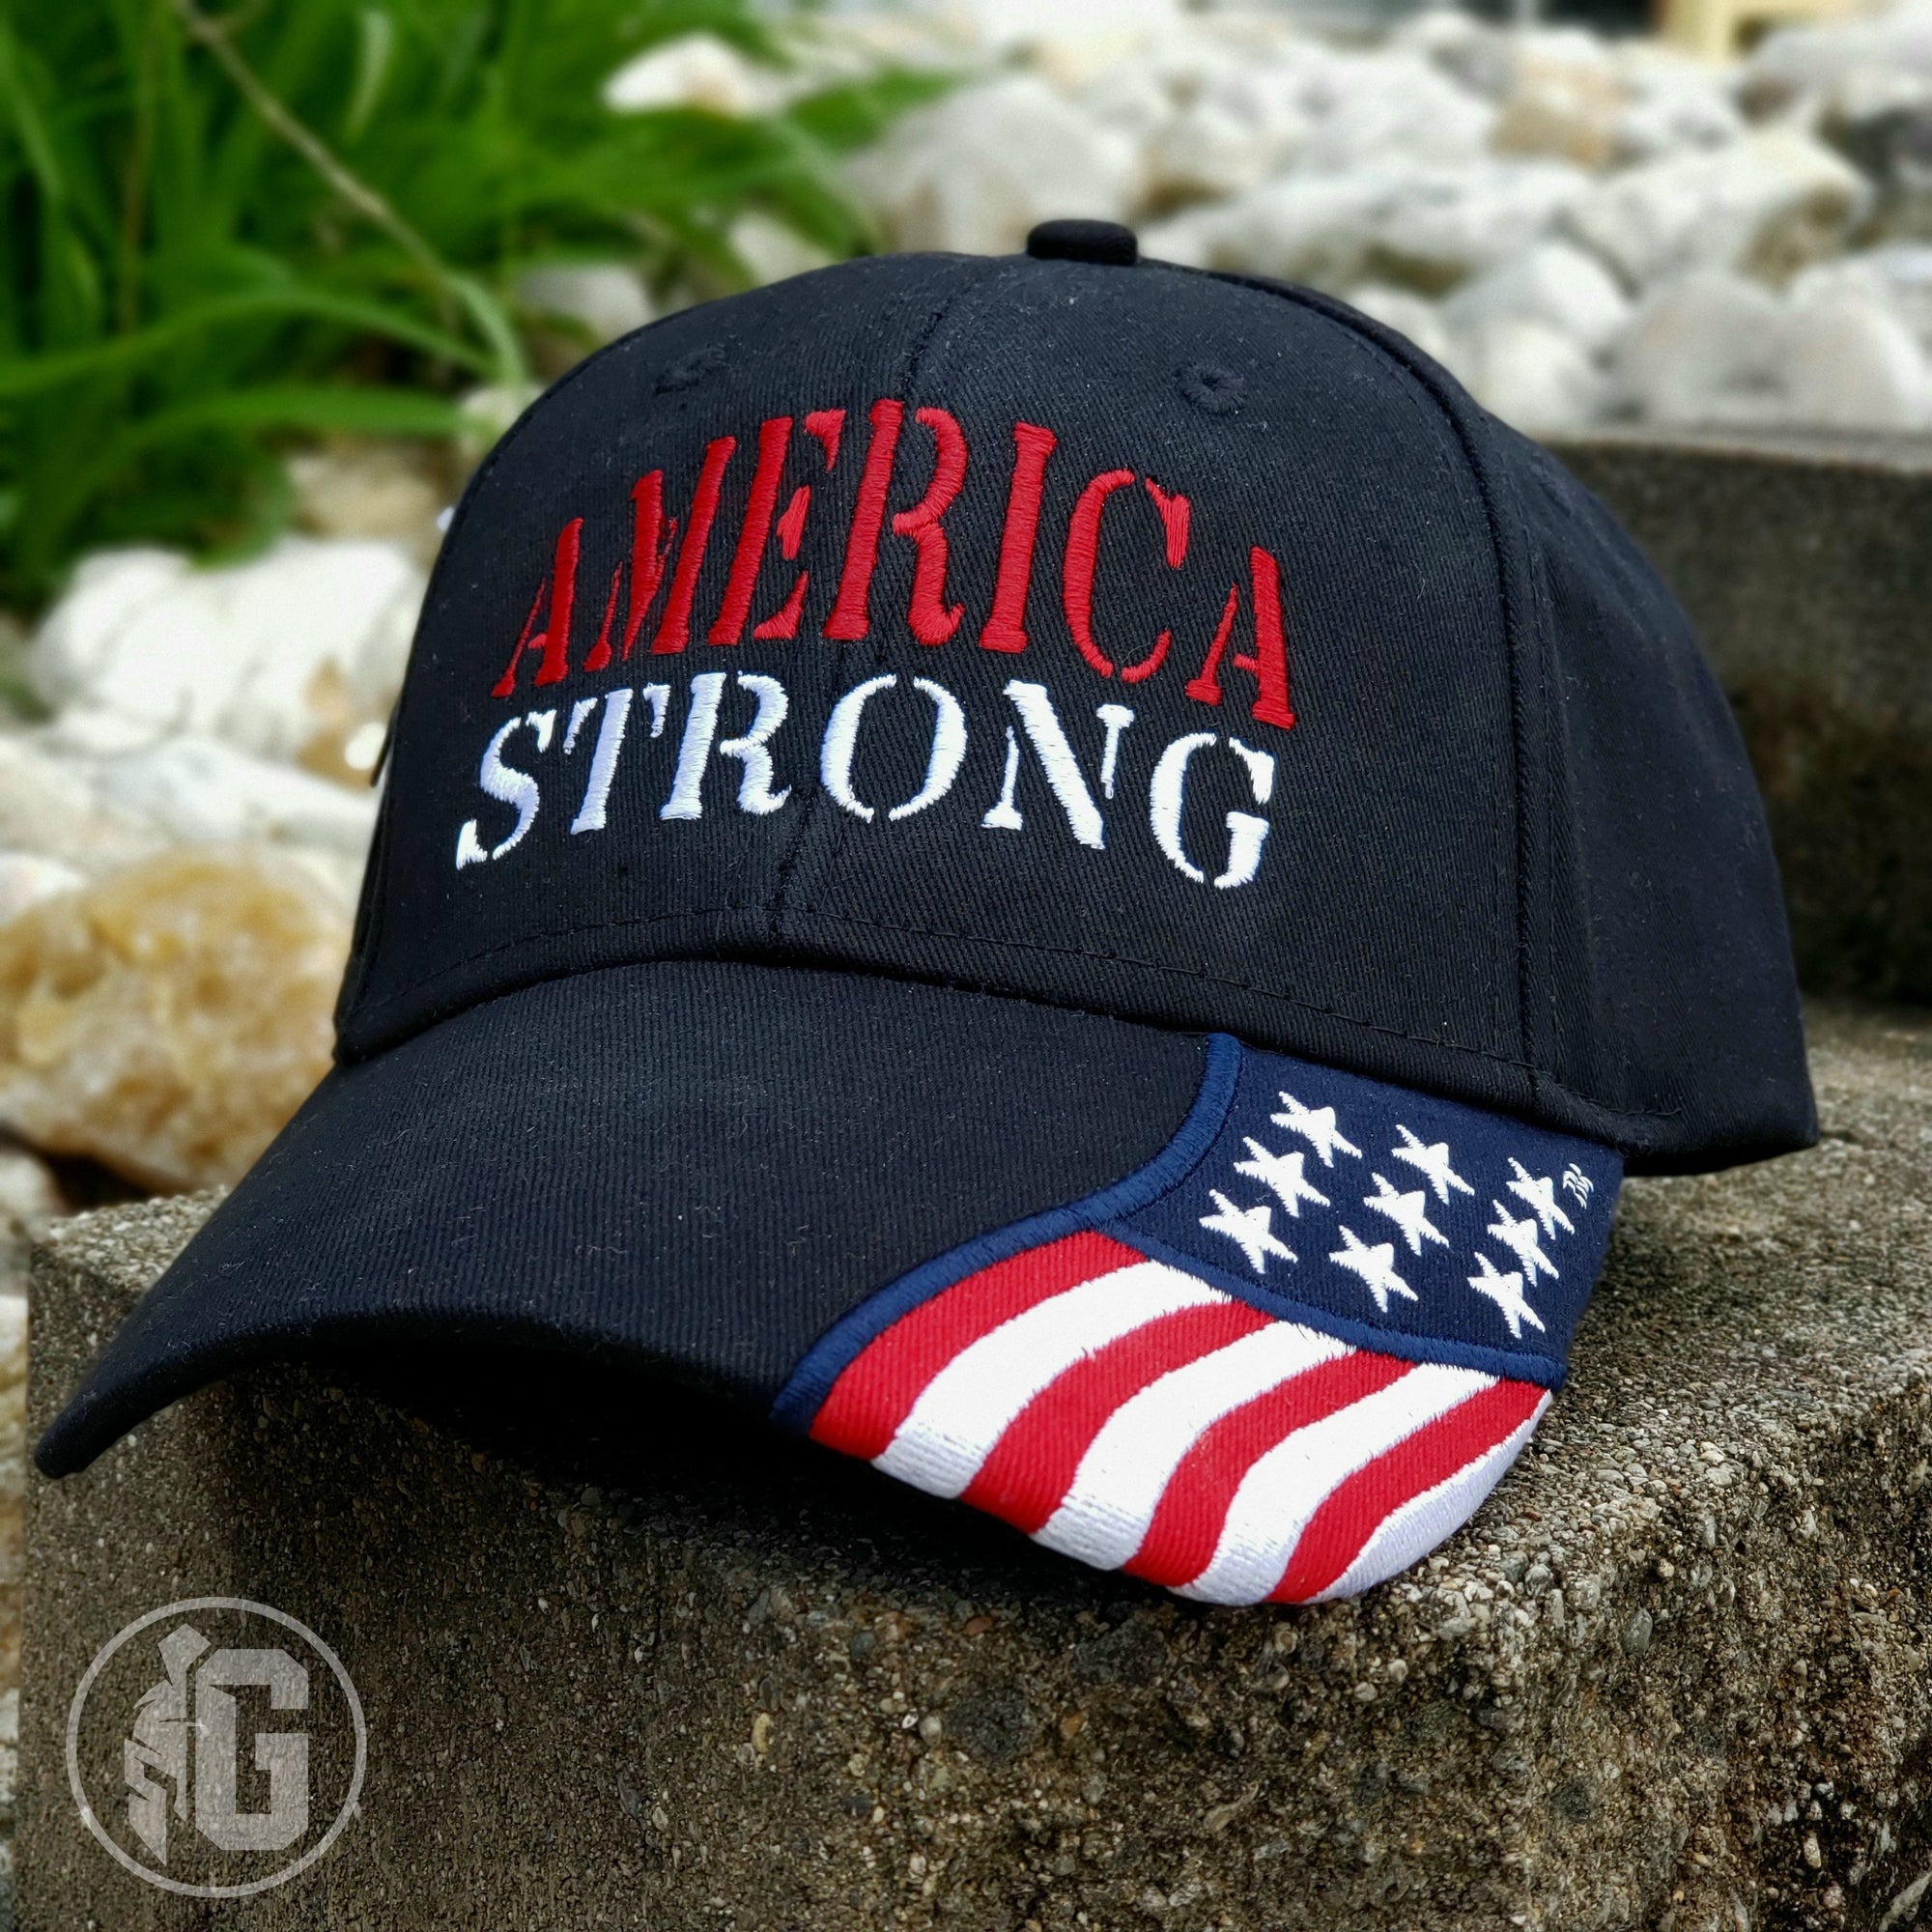 Grit Gear Apparel has a great selection of Patriotic Hats